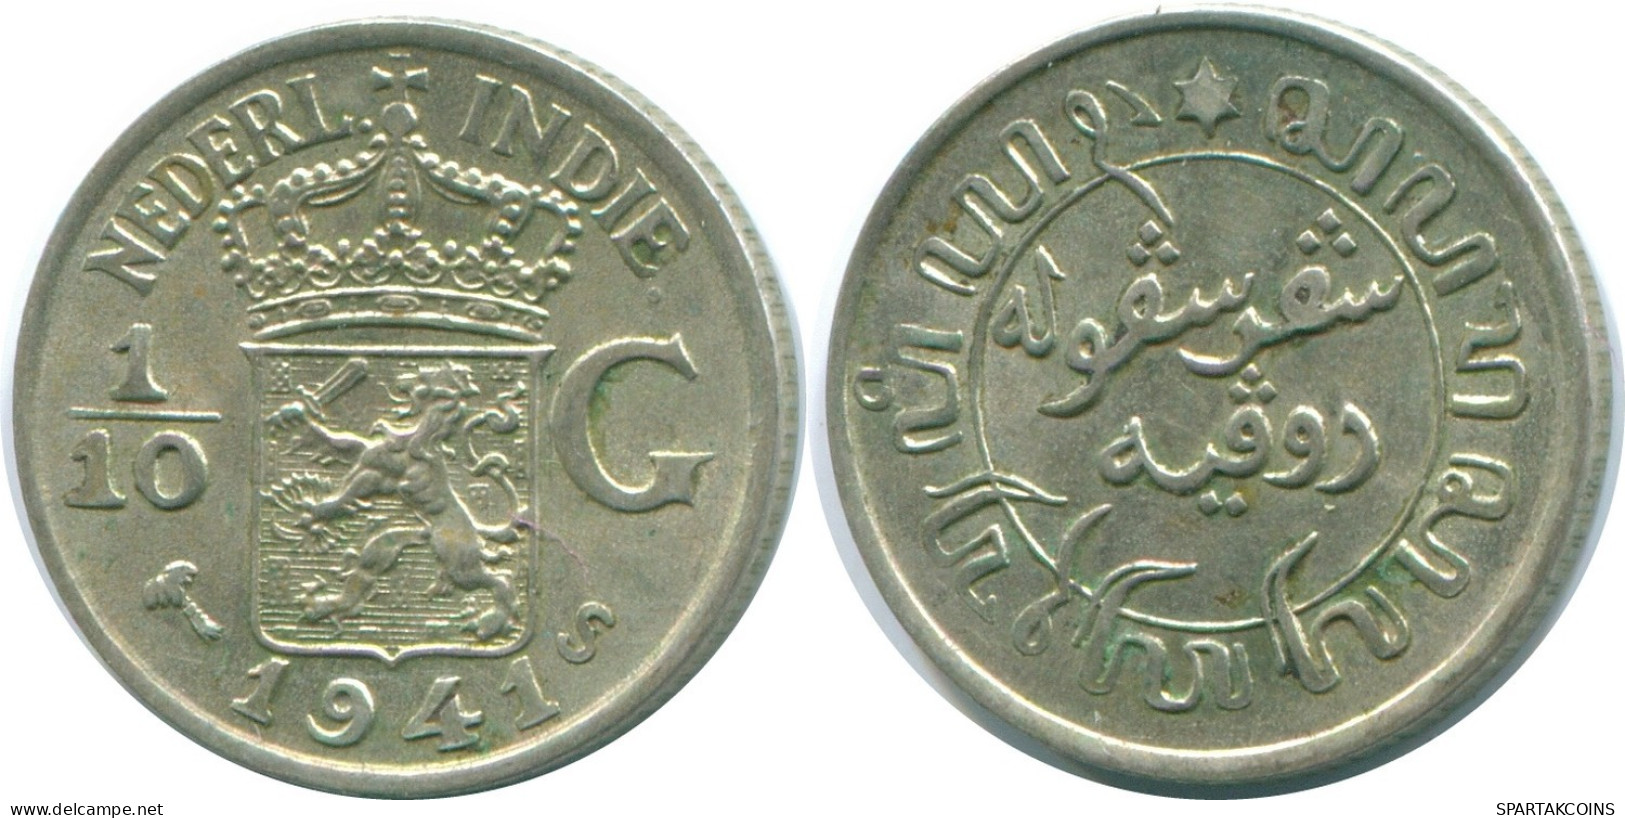 1/10 GULDEN 1941 S NETHERLANDS EAST INDIES SILVER Colonial Coin #NL13743.3.U.A - Dutch East Indies